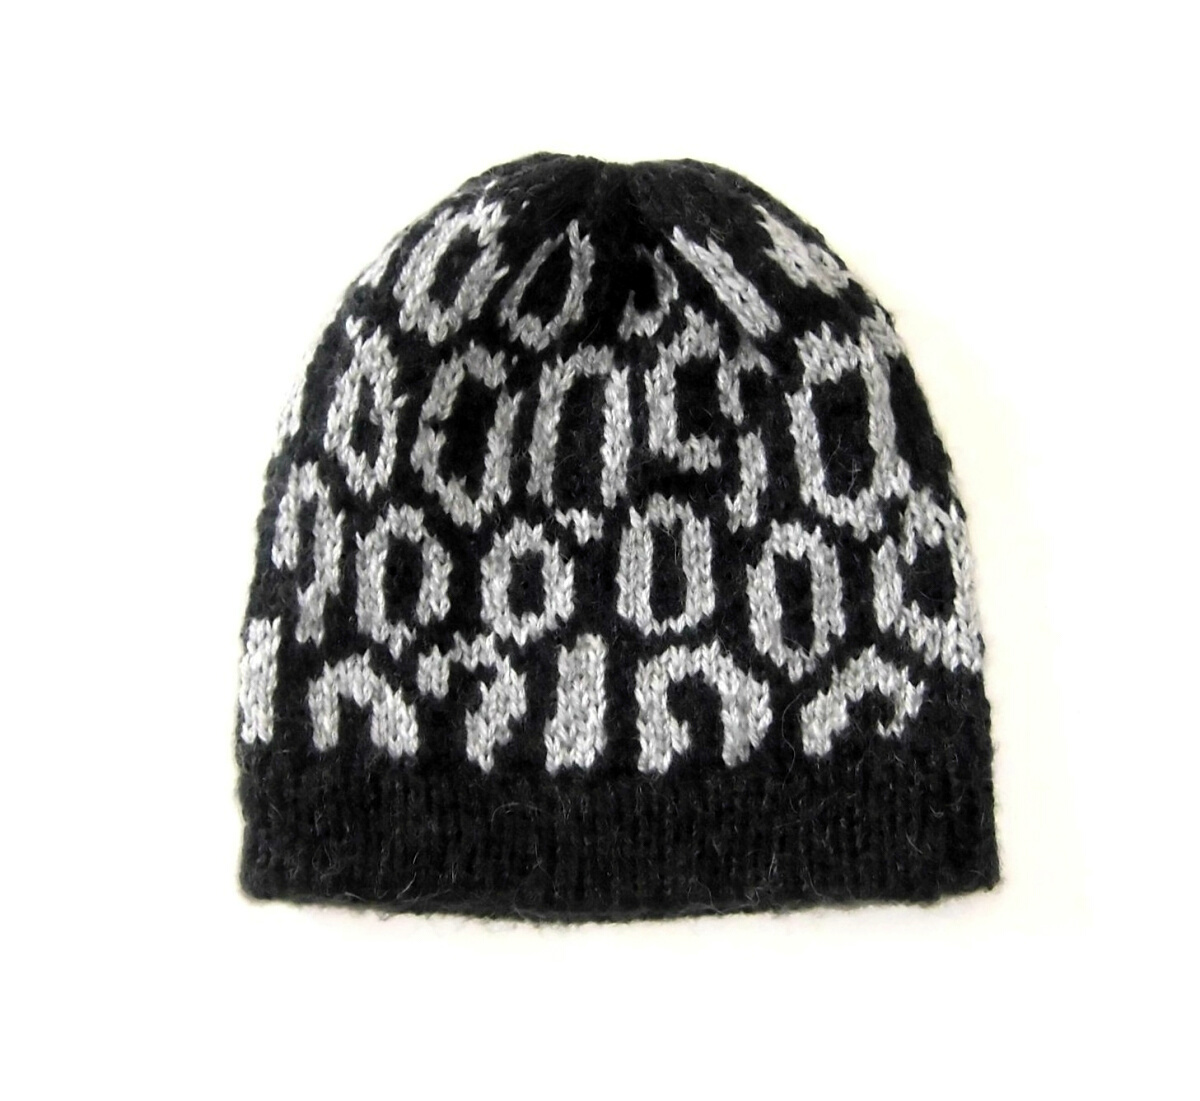 Beanie Hat, black & white, made of Alpacawool, One Size - $30.60